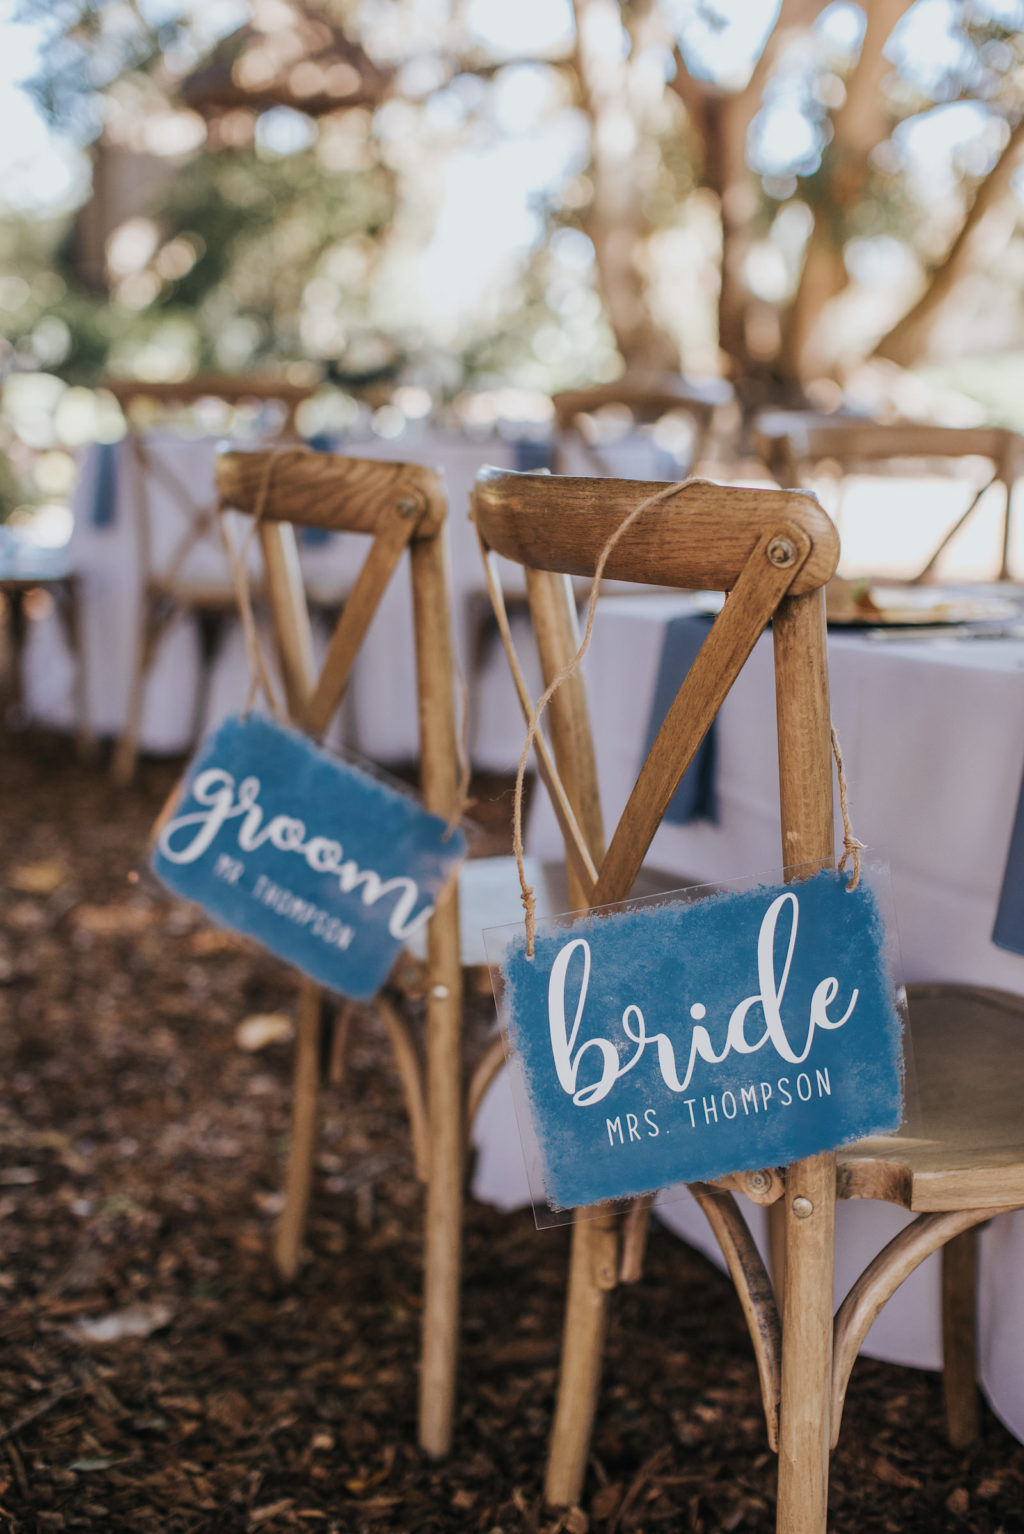 Bride and Groom Blue Wedding Chair Signs on Wooden French Country Chairs | Outdoor Rustic Wedding Reception Ideas